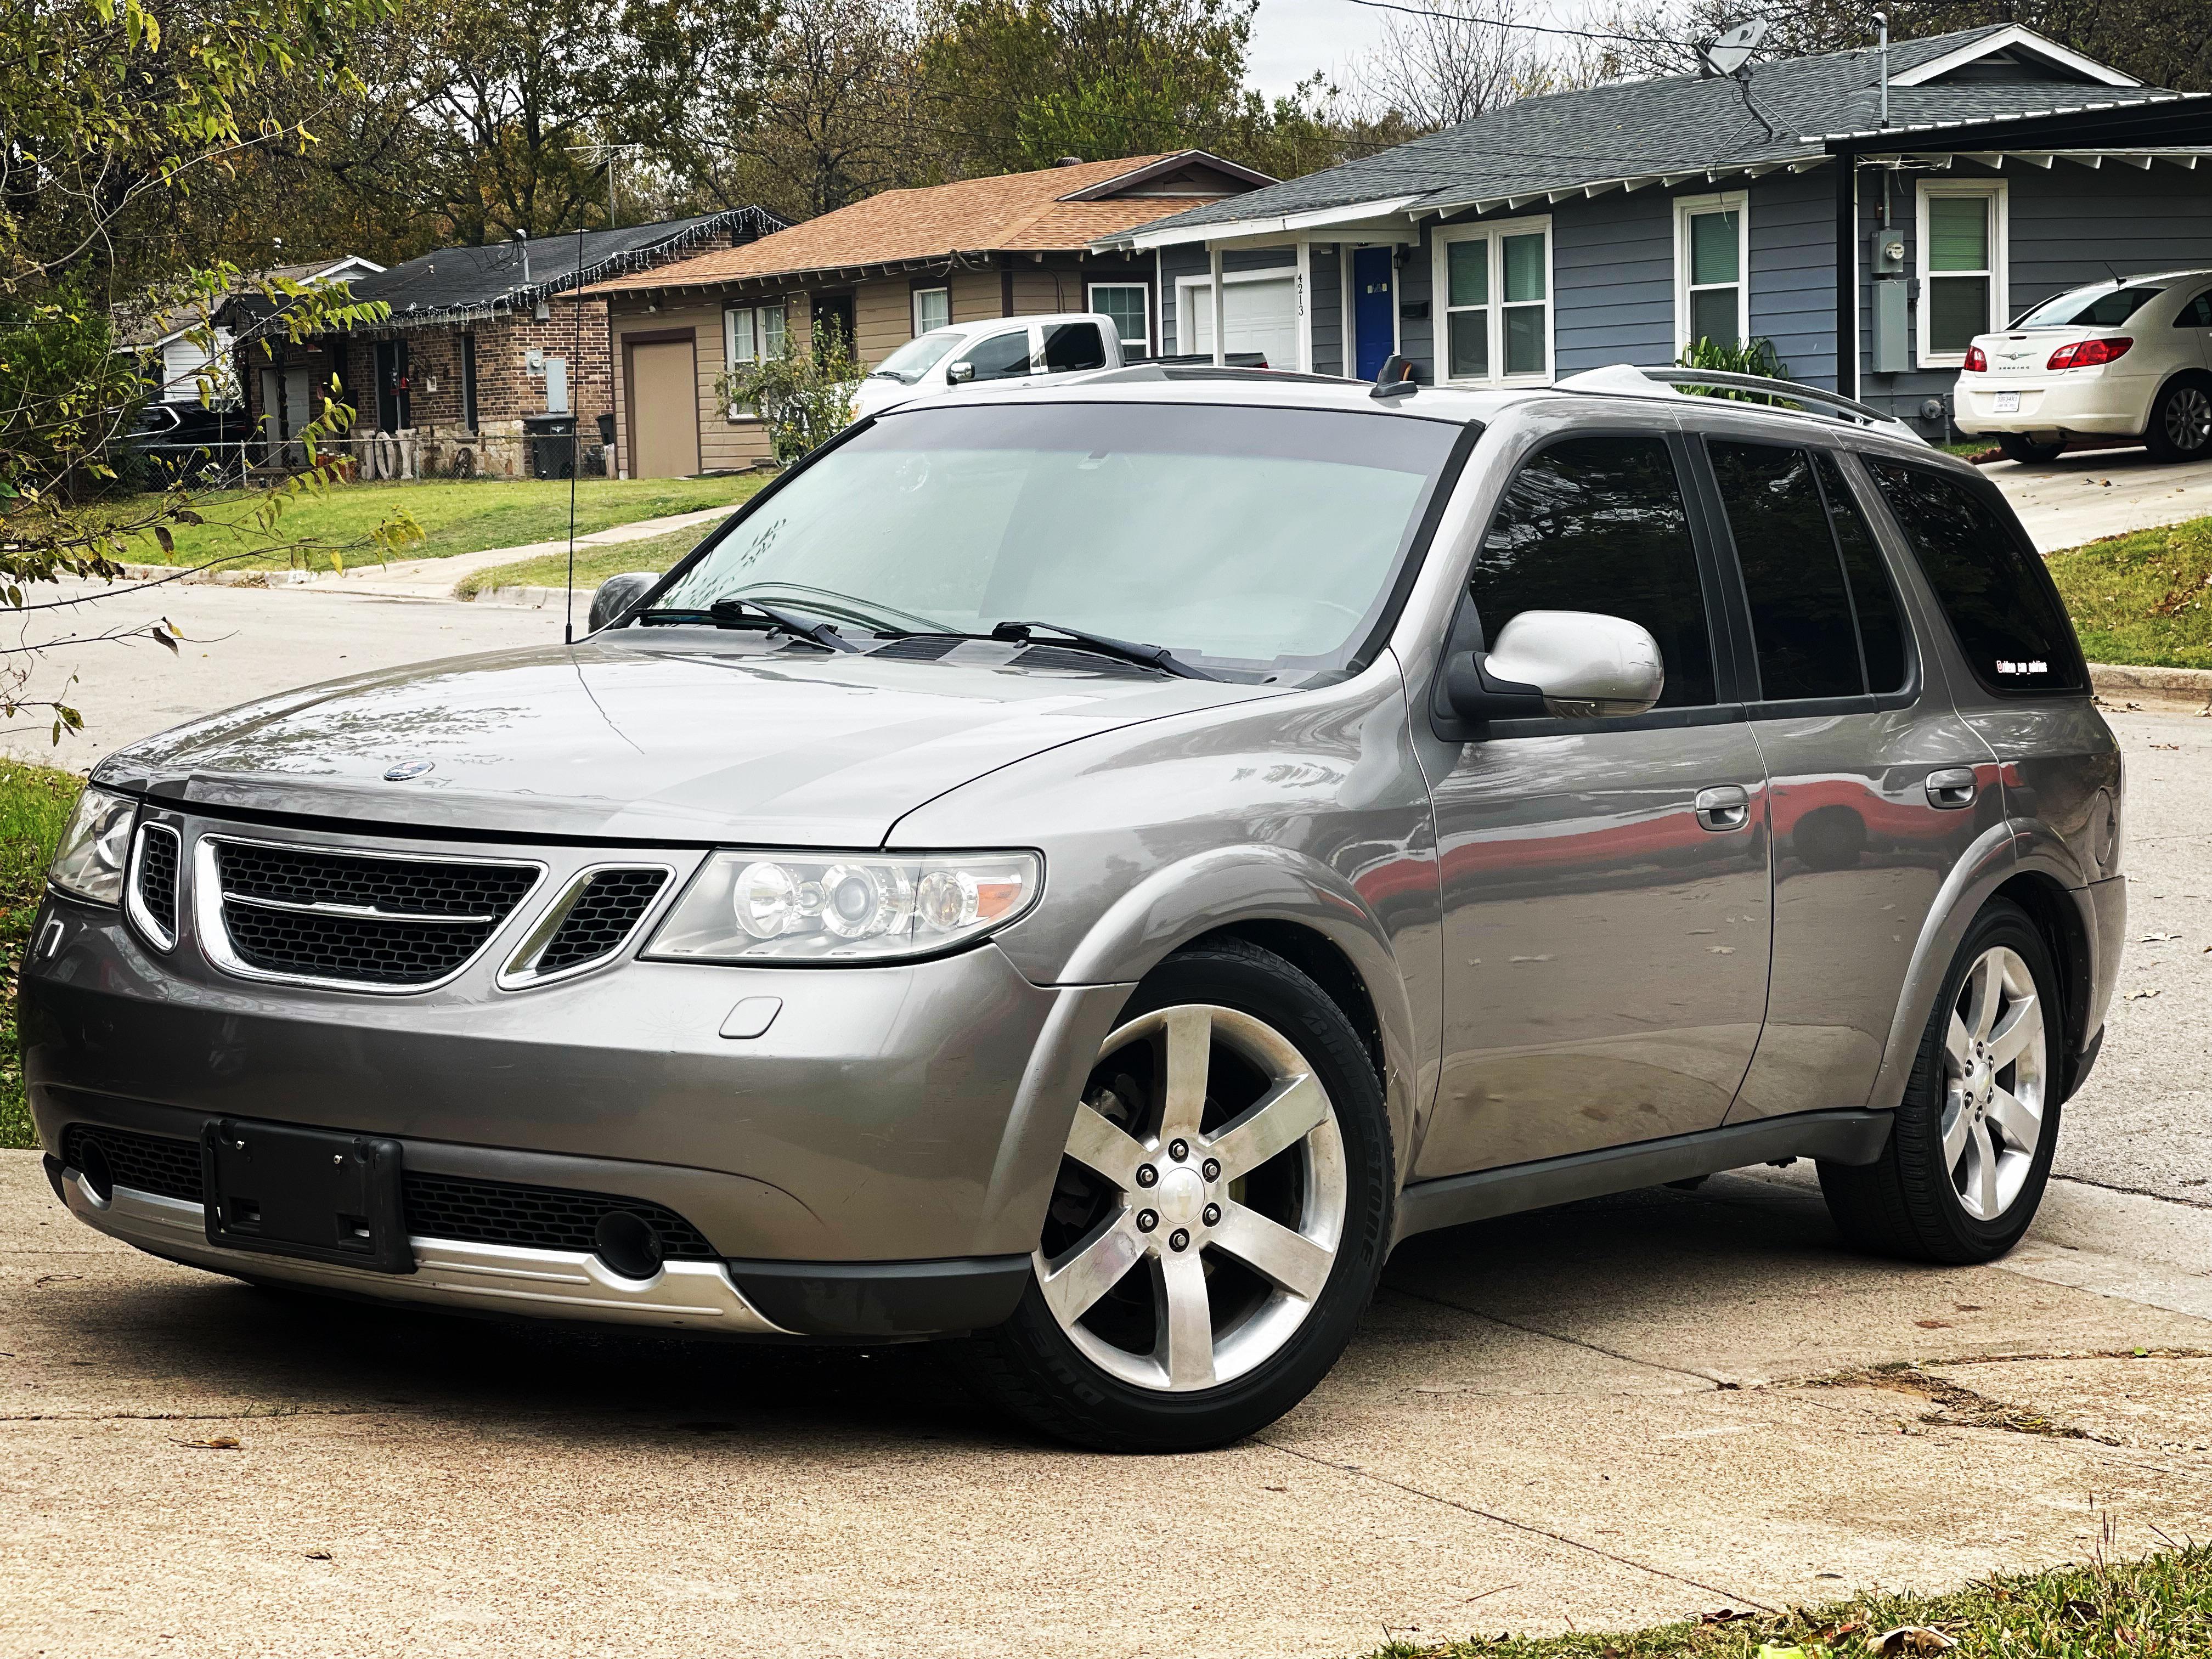 This is my daily project Saab 9-7x 5.3i. Has Stage 4 cam, 2800 Stall TBSS  front and rear diff and transfer case. : r/projectcar